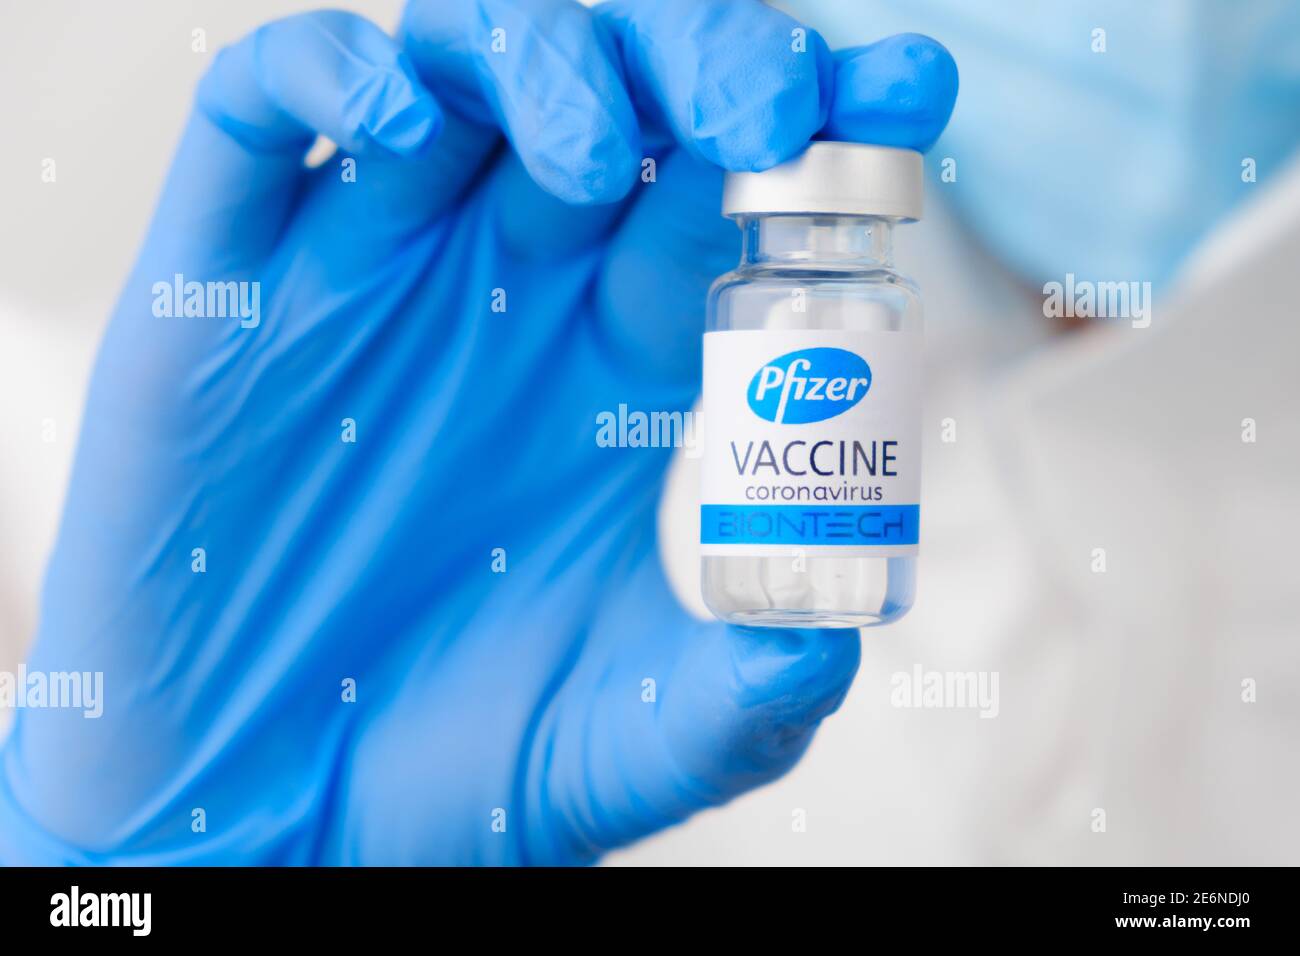 Pfizer coronavirus vaccine in doctors or nurses hands in blue rubber gloves. Prevention of sars-cov-2 or Covid-19, January 2021, San Francisco, USA Stock Photo